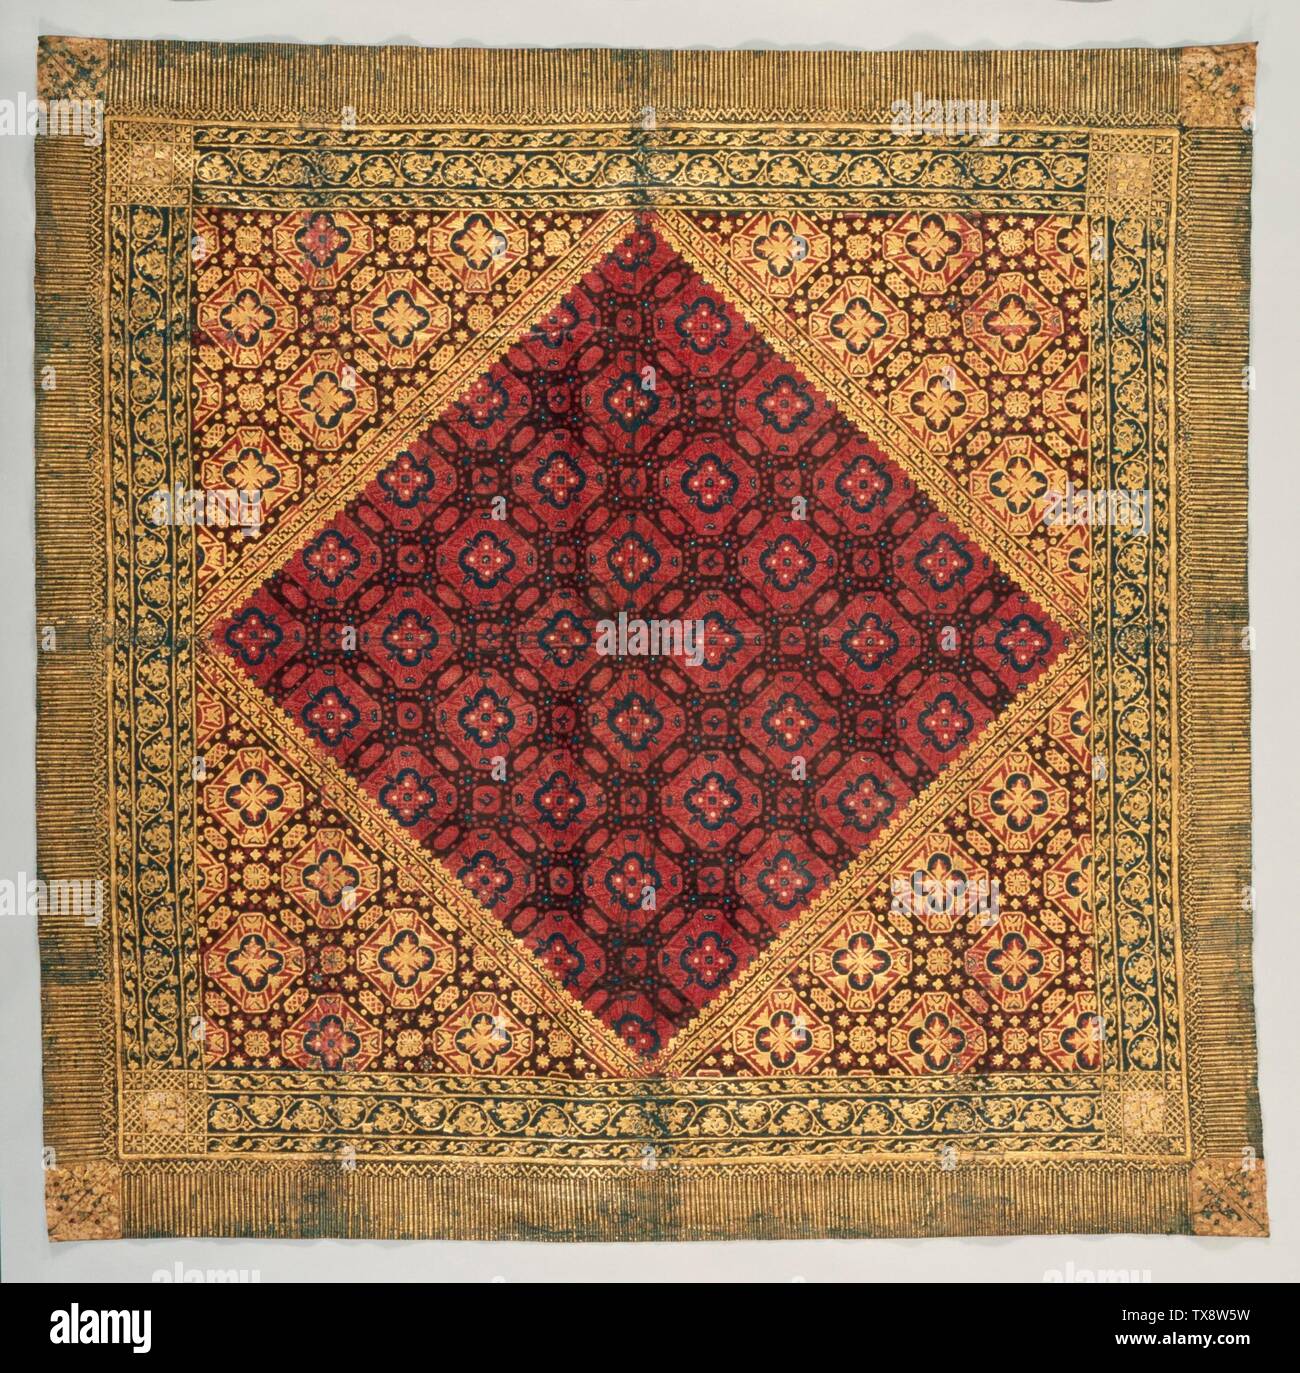 Man's Ceremonial Head Cloth (Iket Kepala Prada Setangan, Destar) (image 2  of 2); Indonesia, Java, Lasem, circa 1880 Costumes Stamped wax resist (batik)  on machine-woven cotton, natural and synthetic dyes and applied